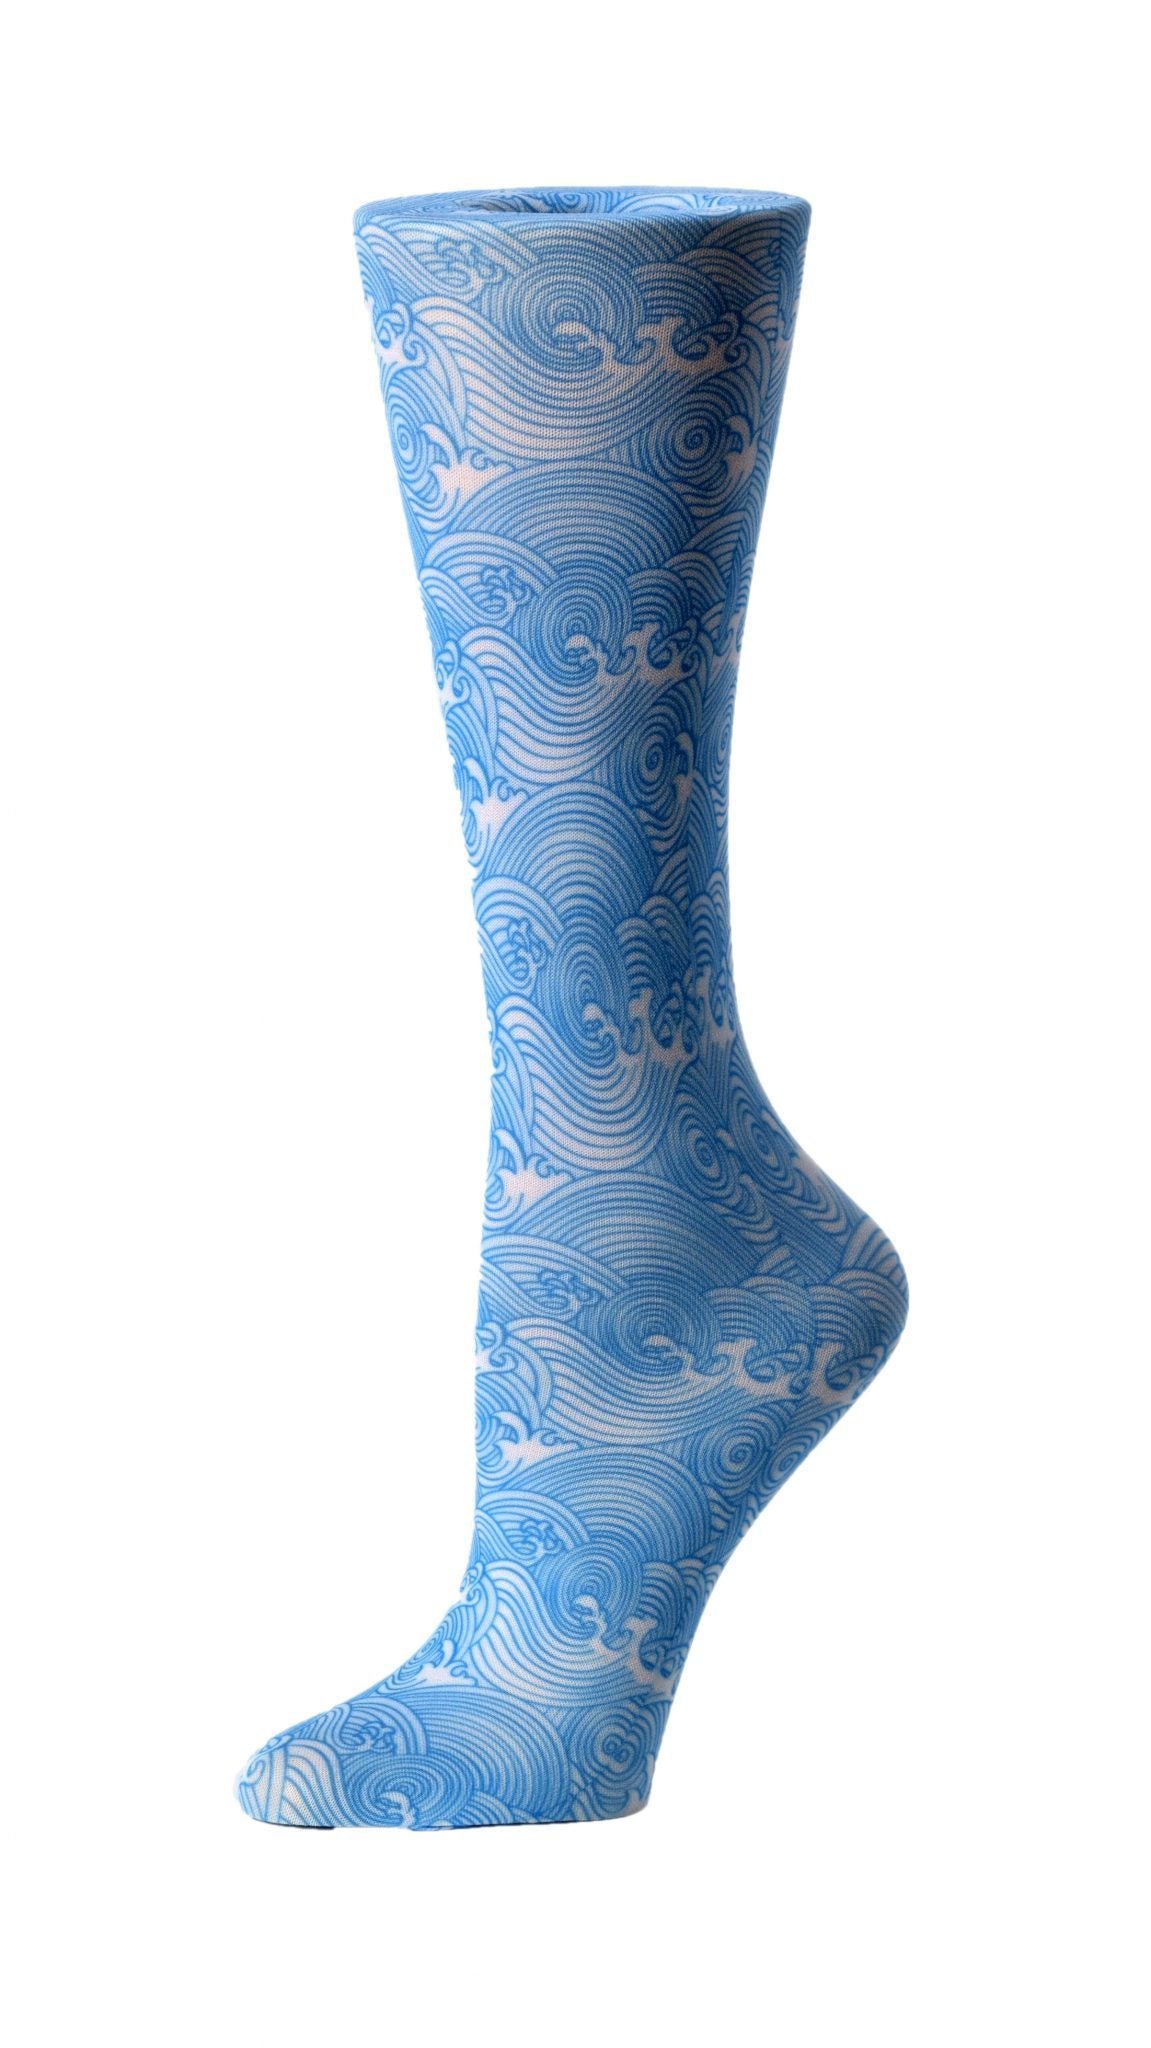 Cutieful Moderate Compression Socks 10-18 mmHg Knit in Print Patterns Ocean Waves at Parker's Clothing and Shoes.